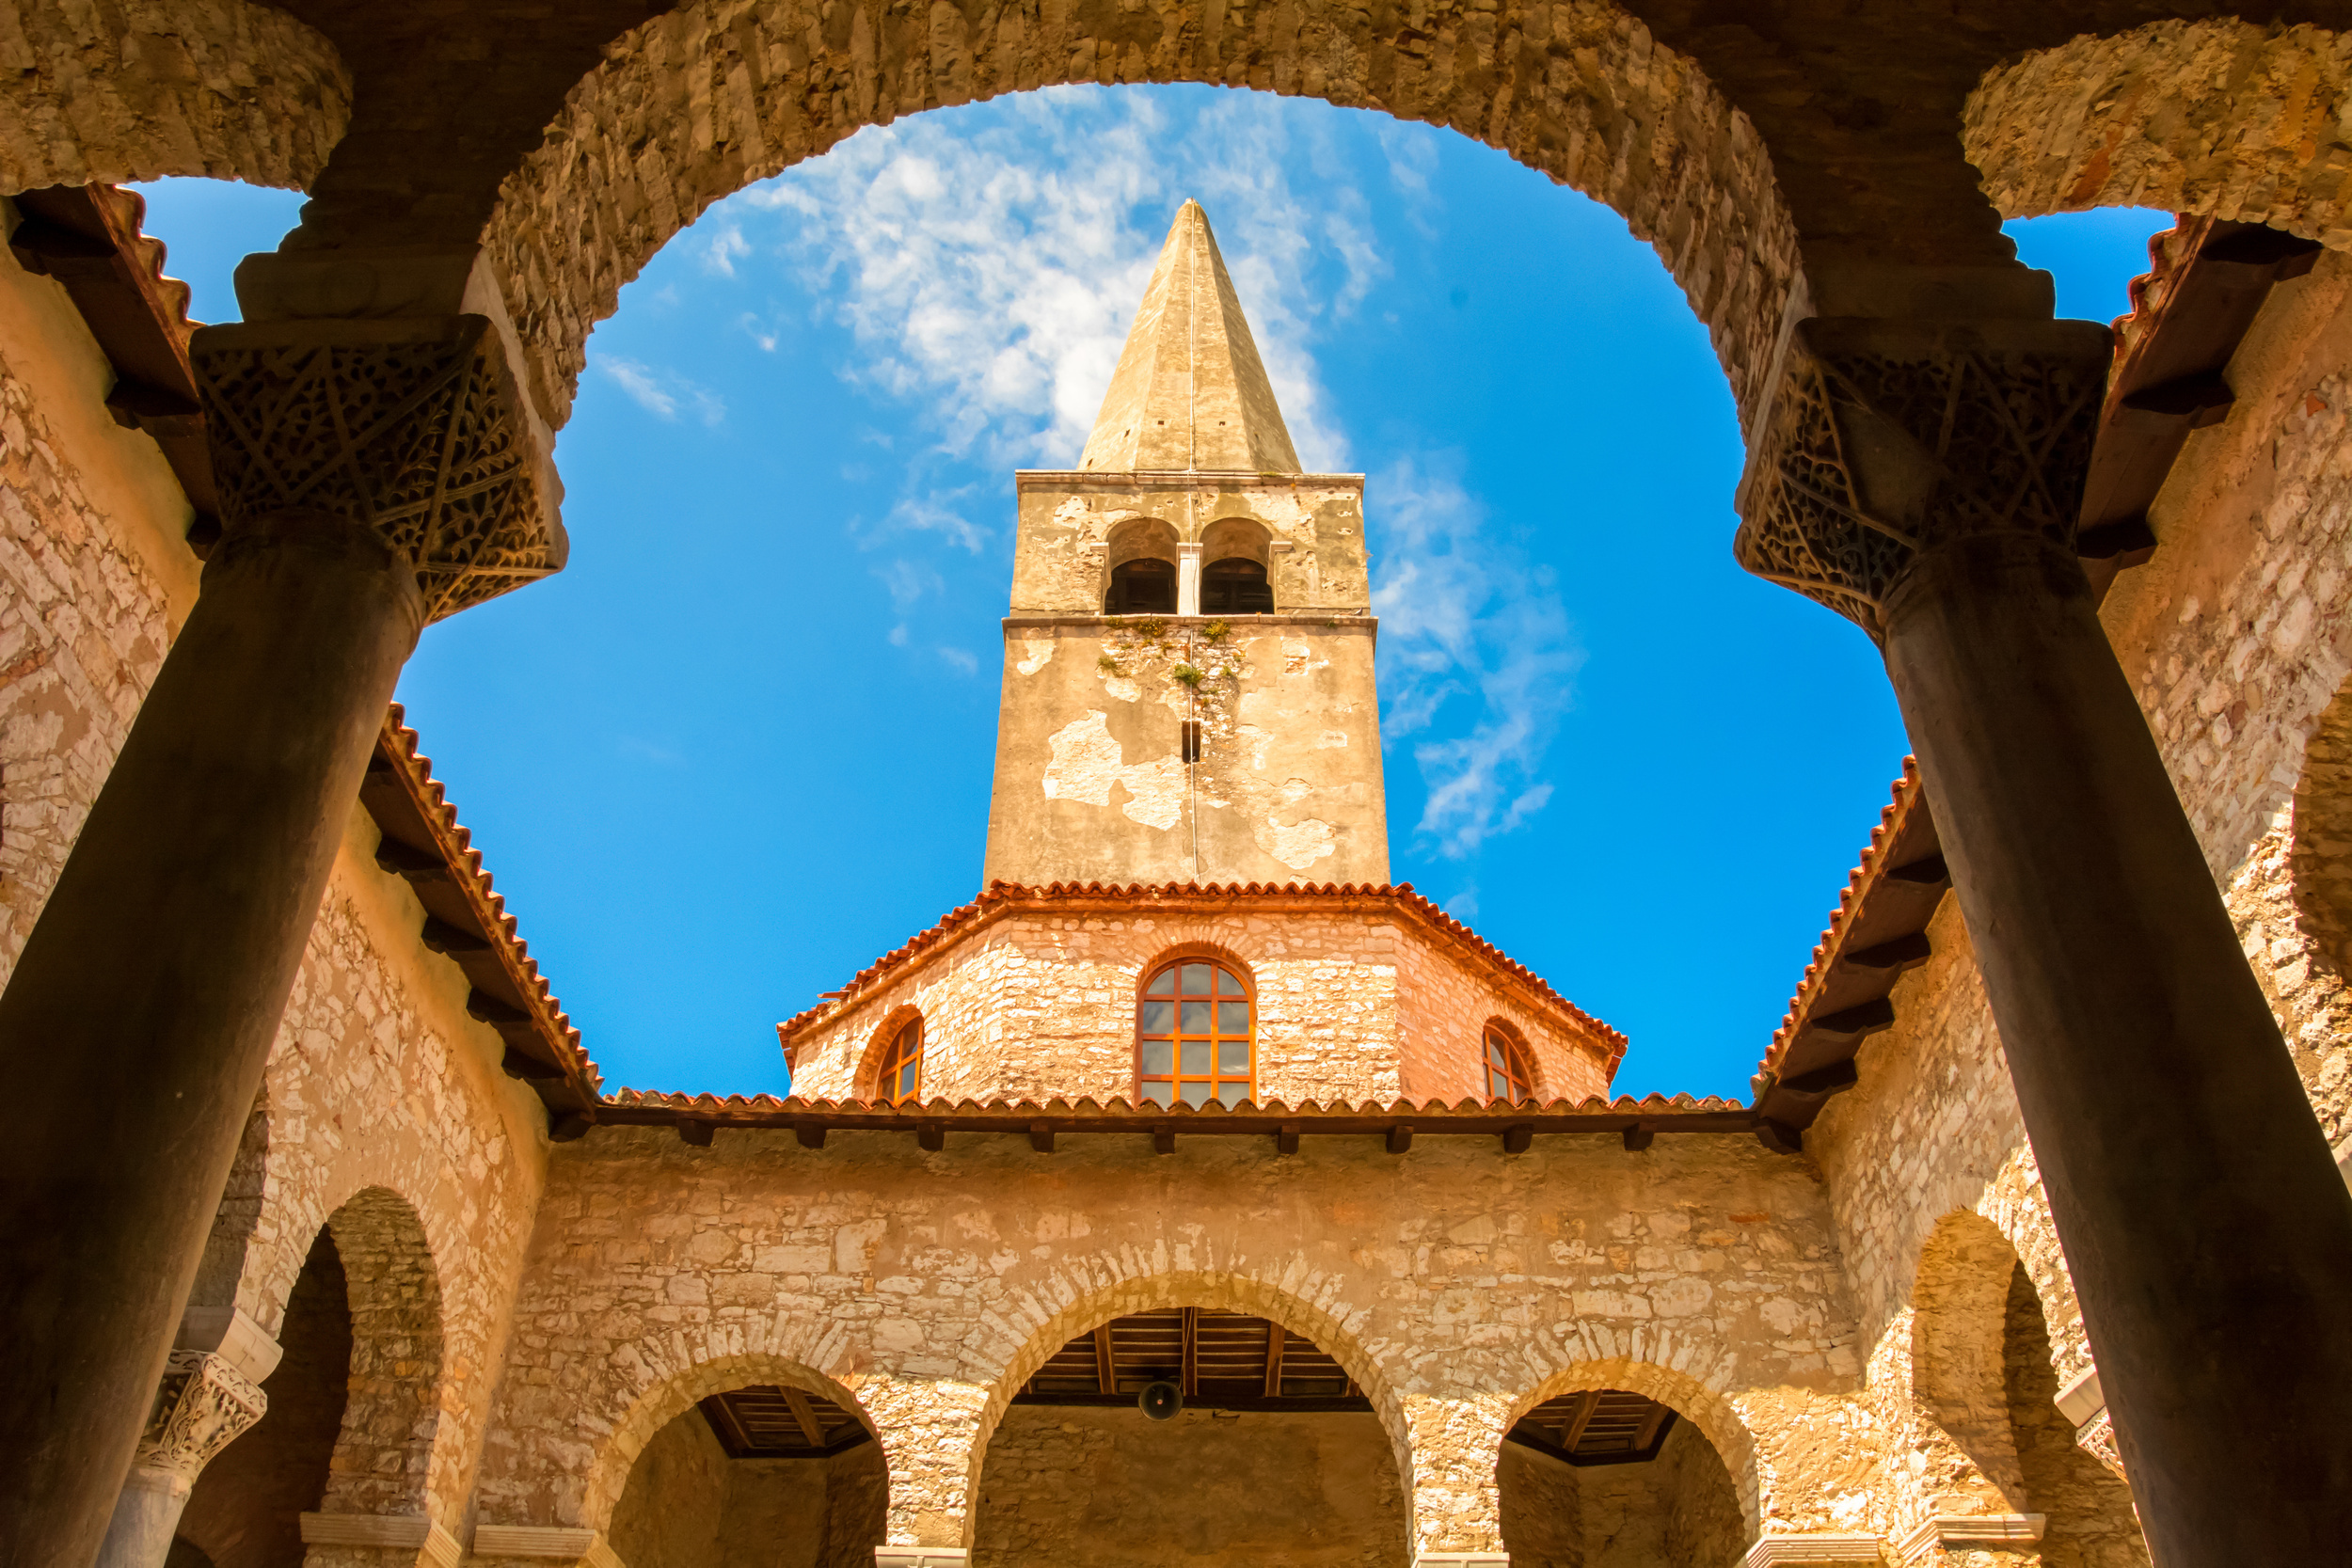 <p>Another cute Istrian port town, Poreč is a popular resort getaway in Croatia. There are plenty of nearby beaches, bars, cafes, and restaurants to keep you occupied. However, the main draw of Poreč is the sixth-century UNESCO World Heritage basilica — don’t miss this on your visit!</p><p><a href='https://www.msn.com/en-us/community/channel/vid-cj9pqbr0vn9in2b6ddcd8sfgpfq6x6utp44fssrv6mc2gtybw0us'>Follow us on MSN to see more of our exclusive lifestyle content.</a></p>